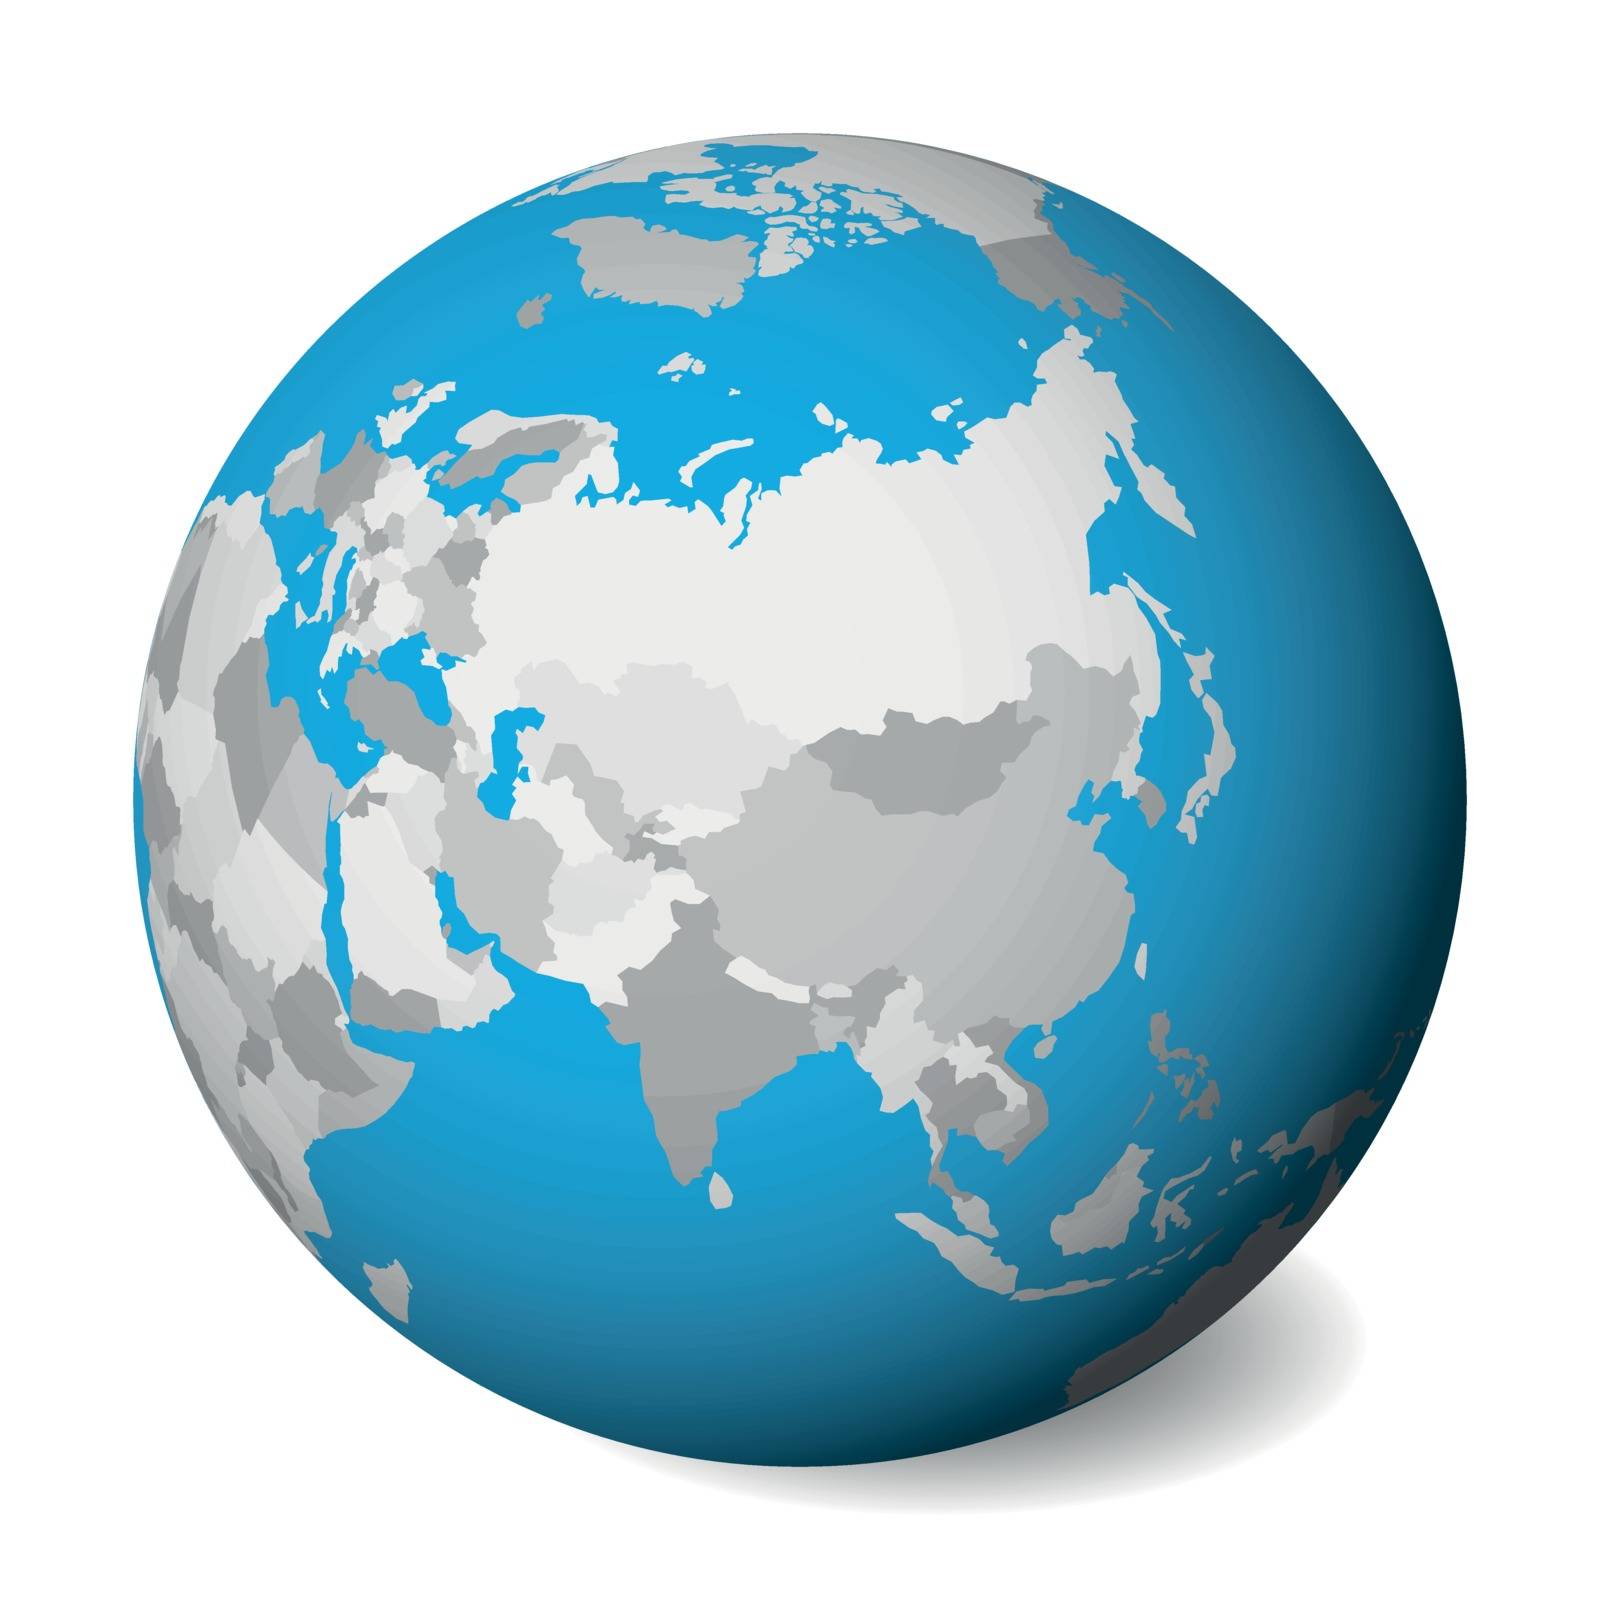 Blank political map of Asia. 3D Earth globe with blue water and grey lands. Vector illustration by pyty